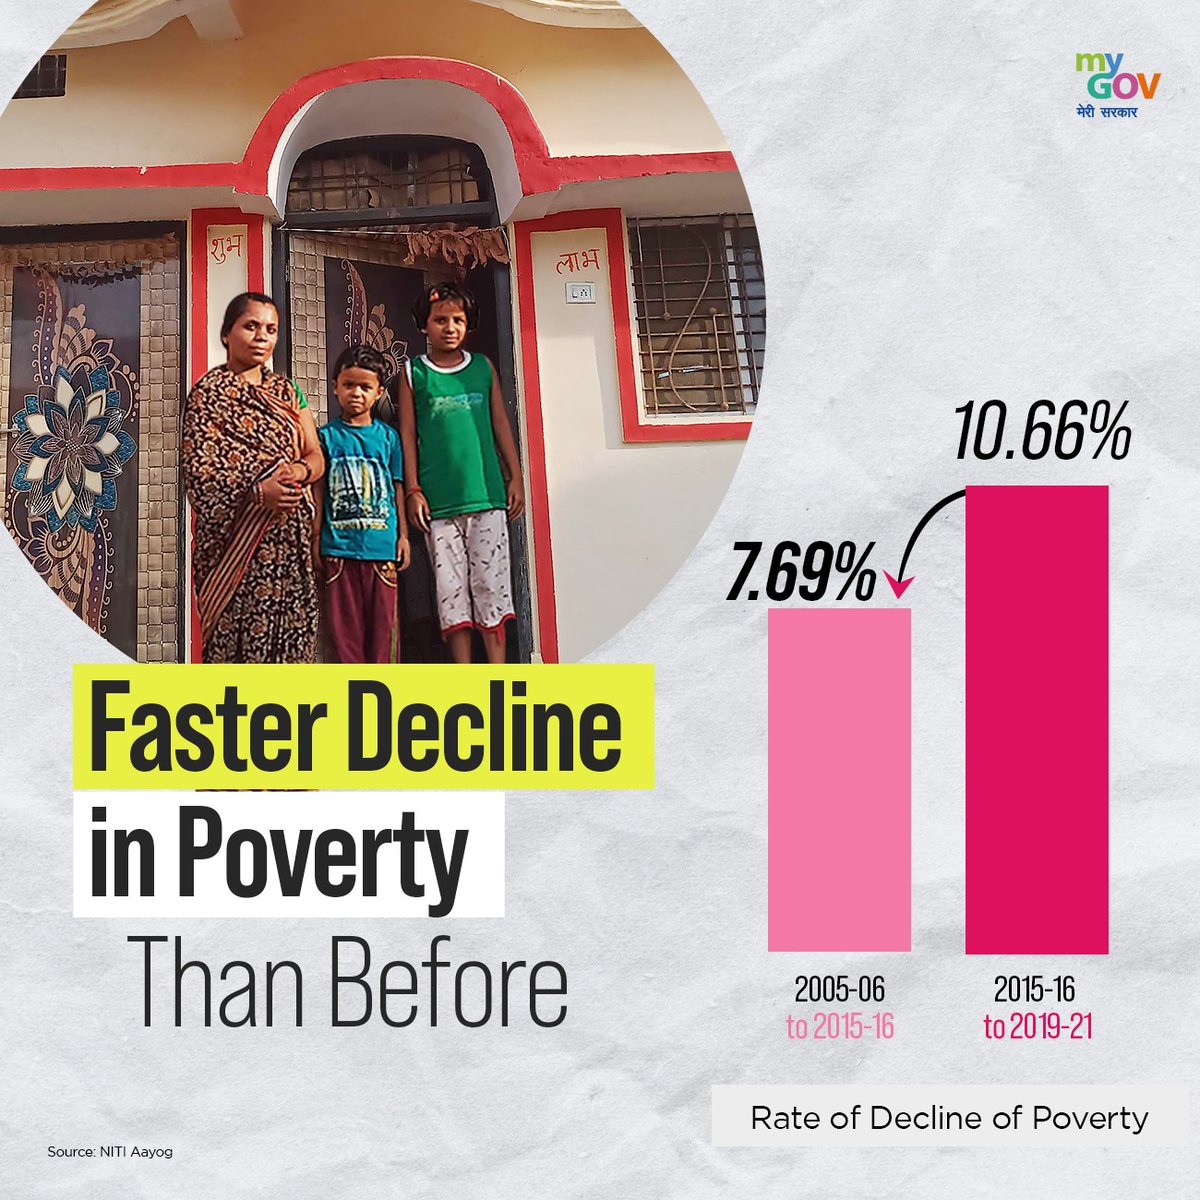 Accelerated Progress Against Poverty!

In the decade from 2005-06 to 2015-16, the rate of poverty decline stood at 7.69%. However, since 2015-16, India has witnessed an accelerated rate of poverty reduction, soaring to 10.66%.

#PovertyReduction
#NewIndia
#PovertyFreeIndia